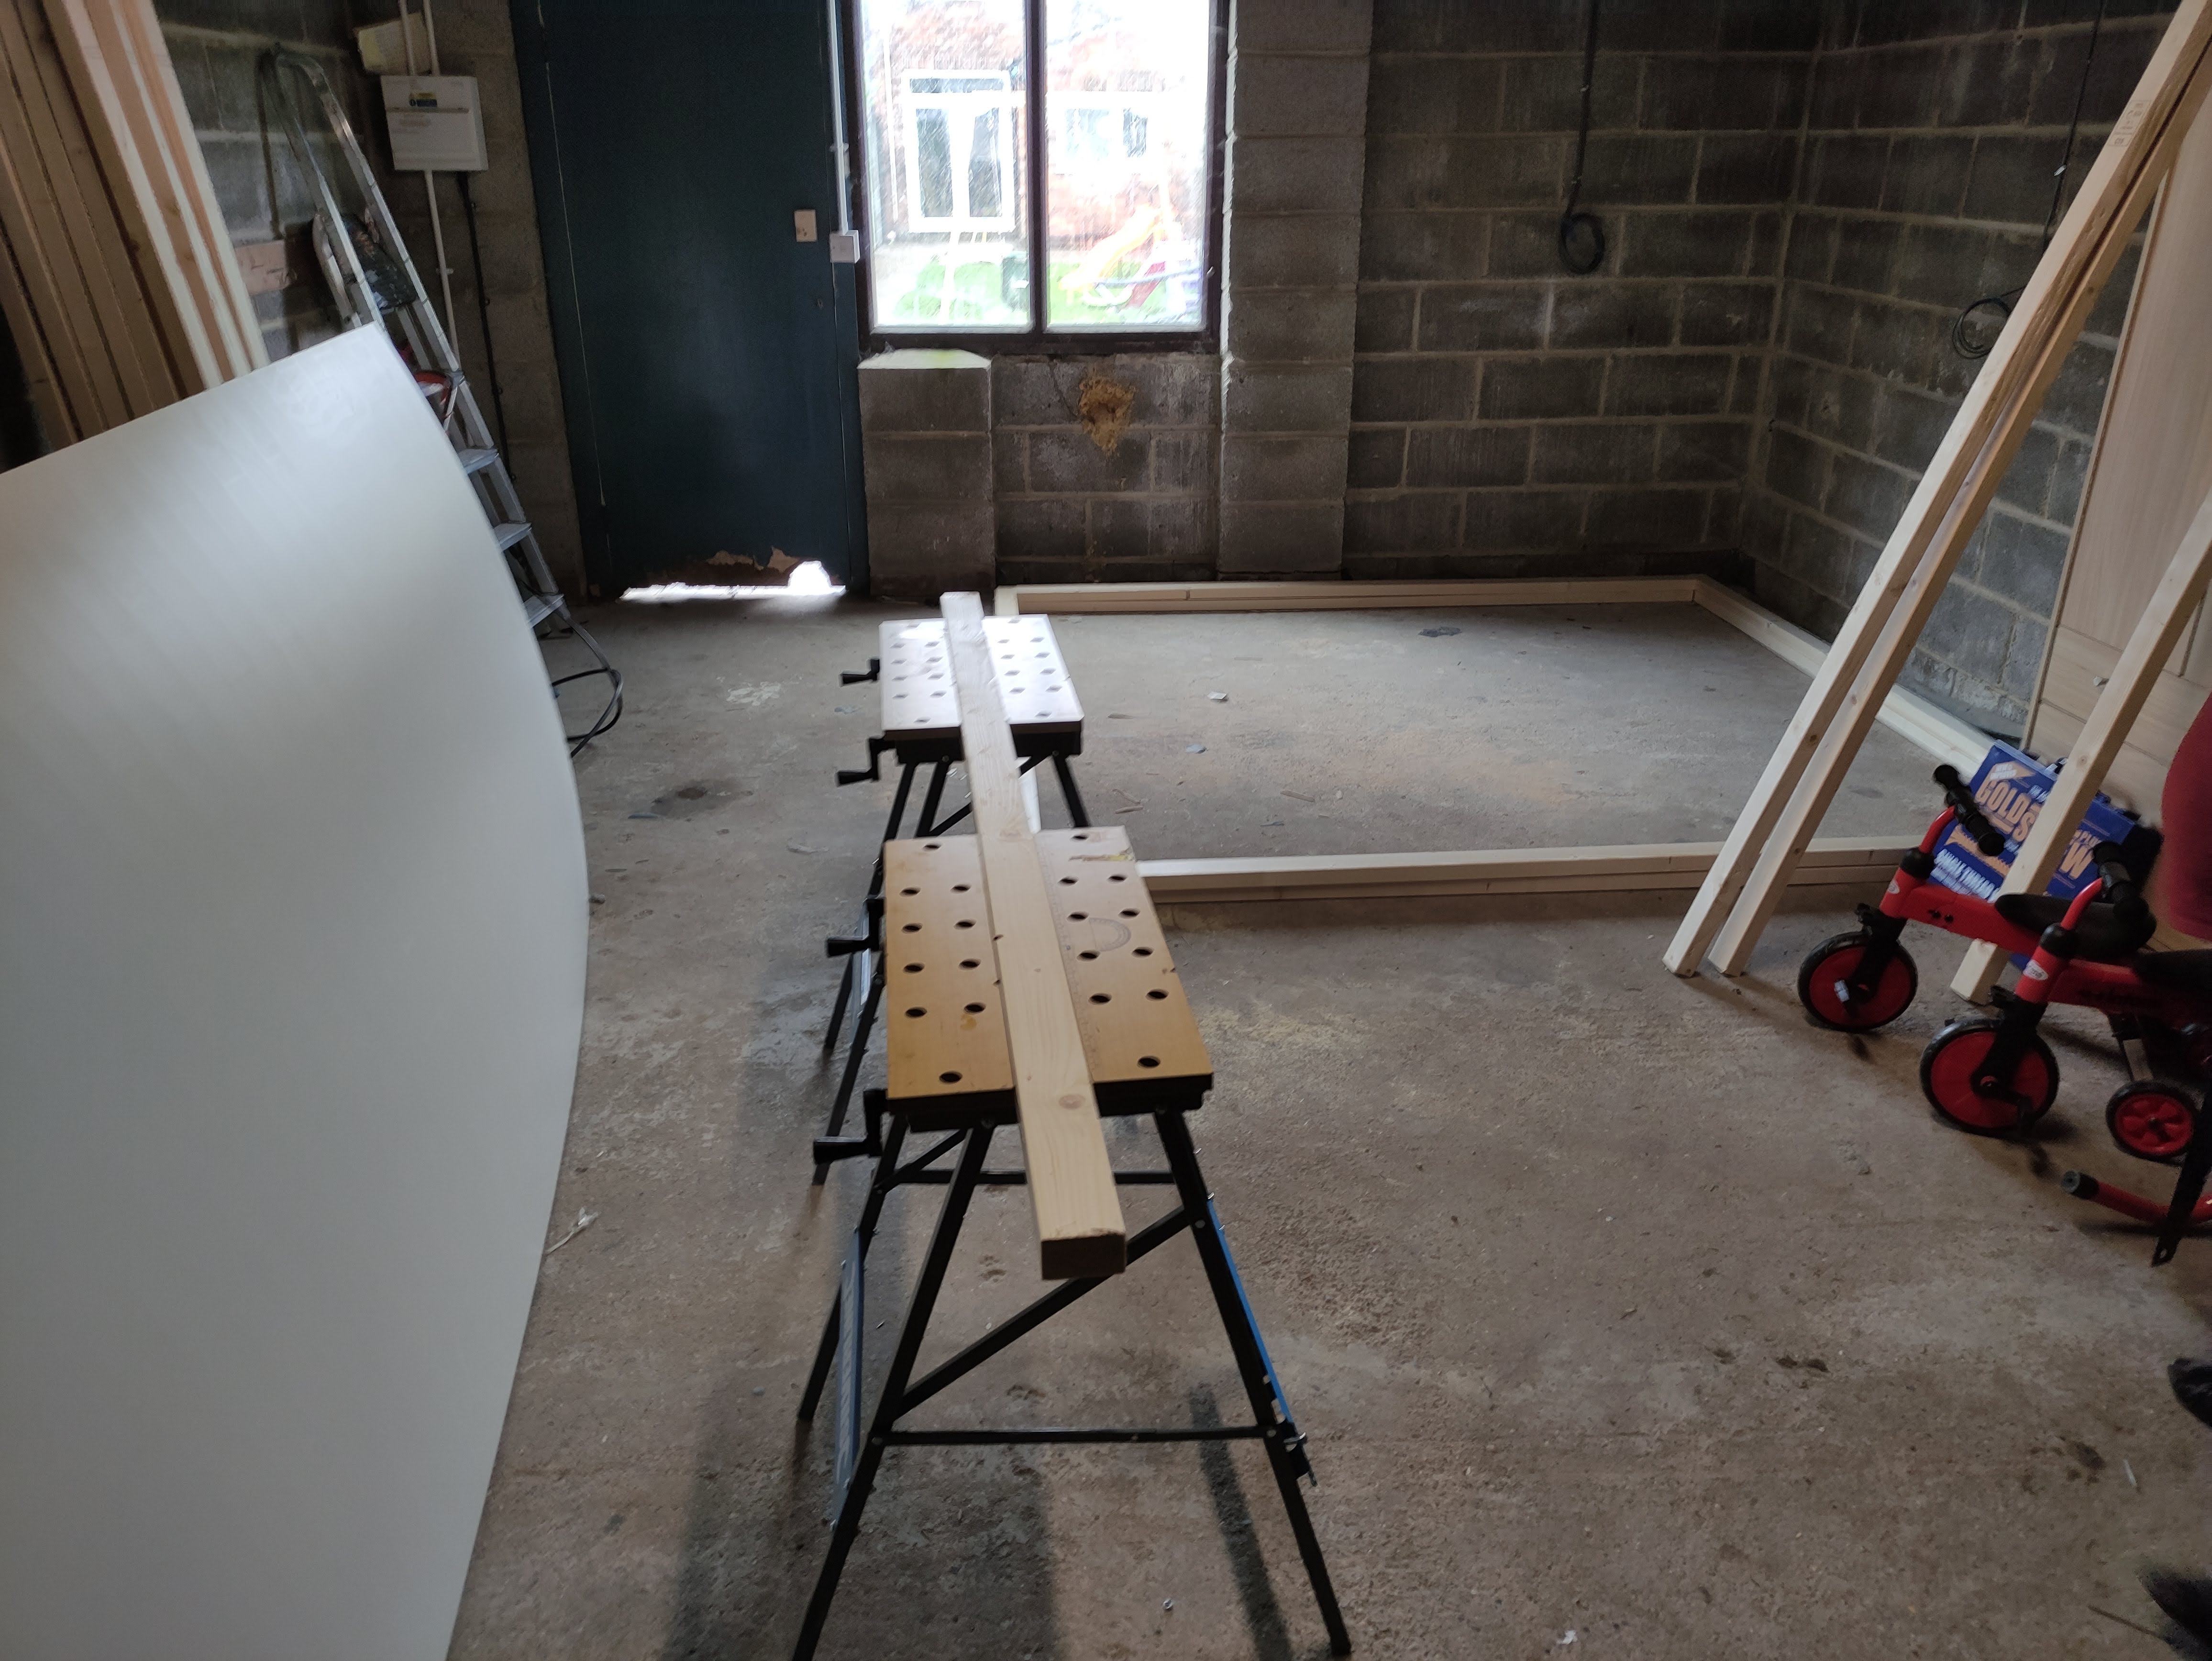 Work benches with wood clamped ready for sawing